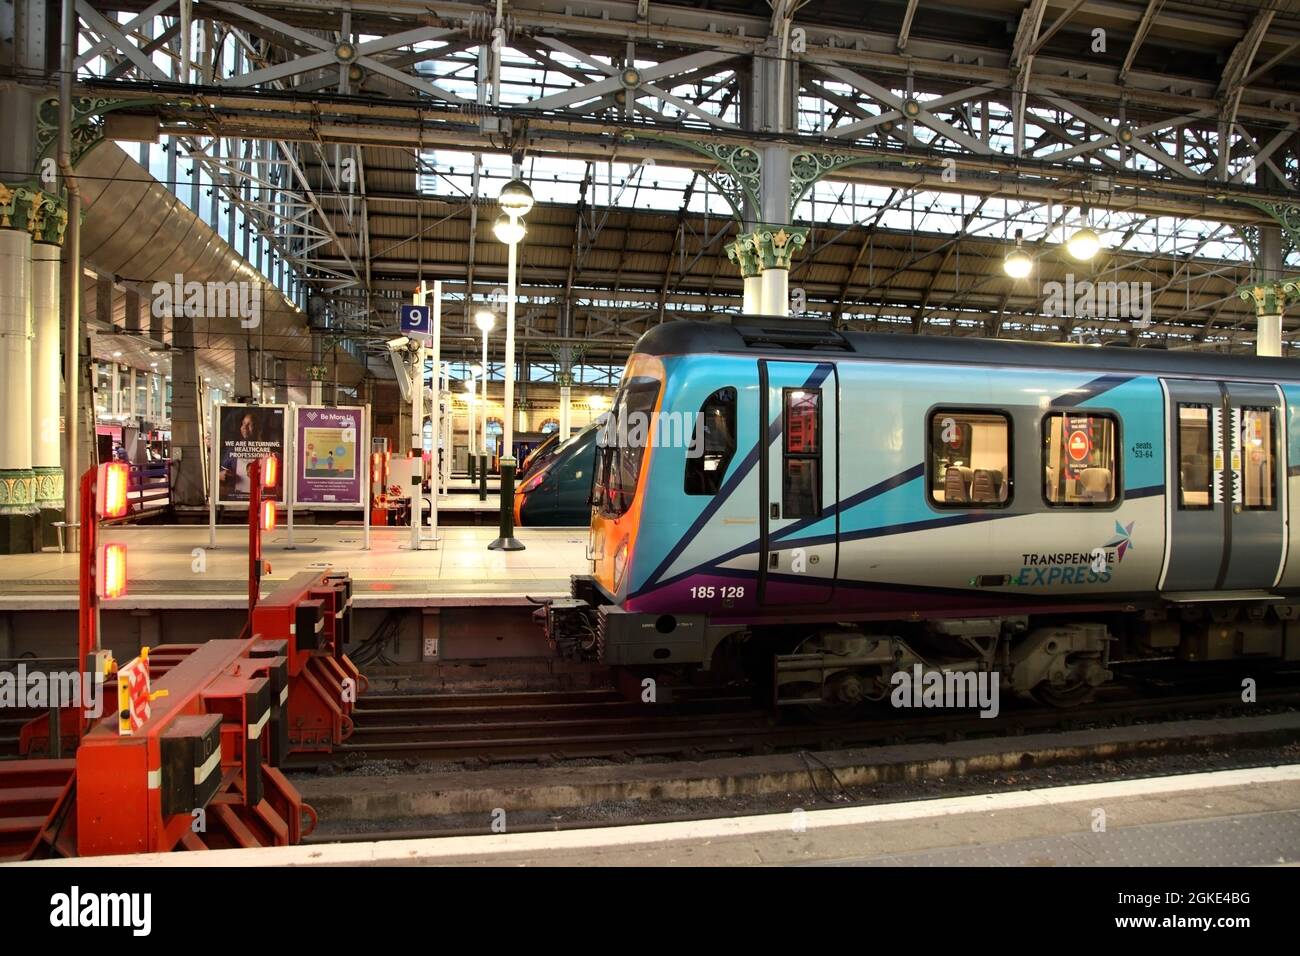 Transpennine Express Class 185 Desiro multiple unit no. 185128 at Manchester Piccadilly station, UK. Stock Photo